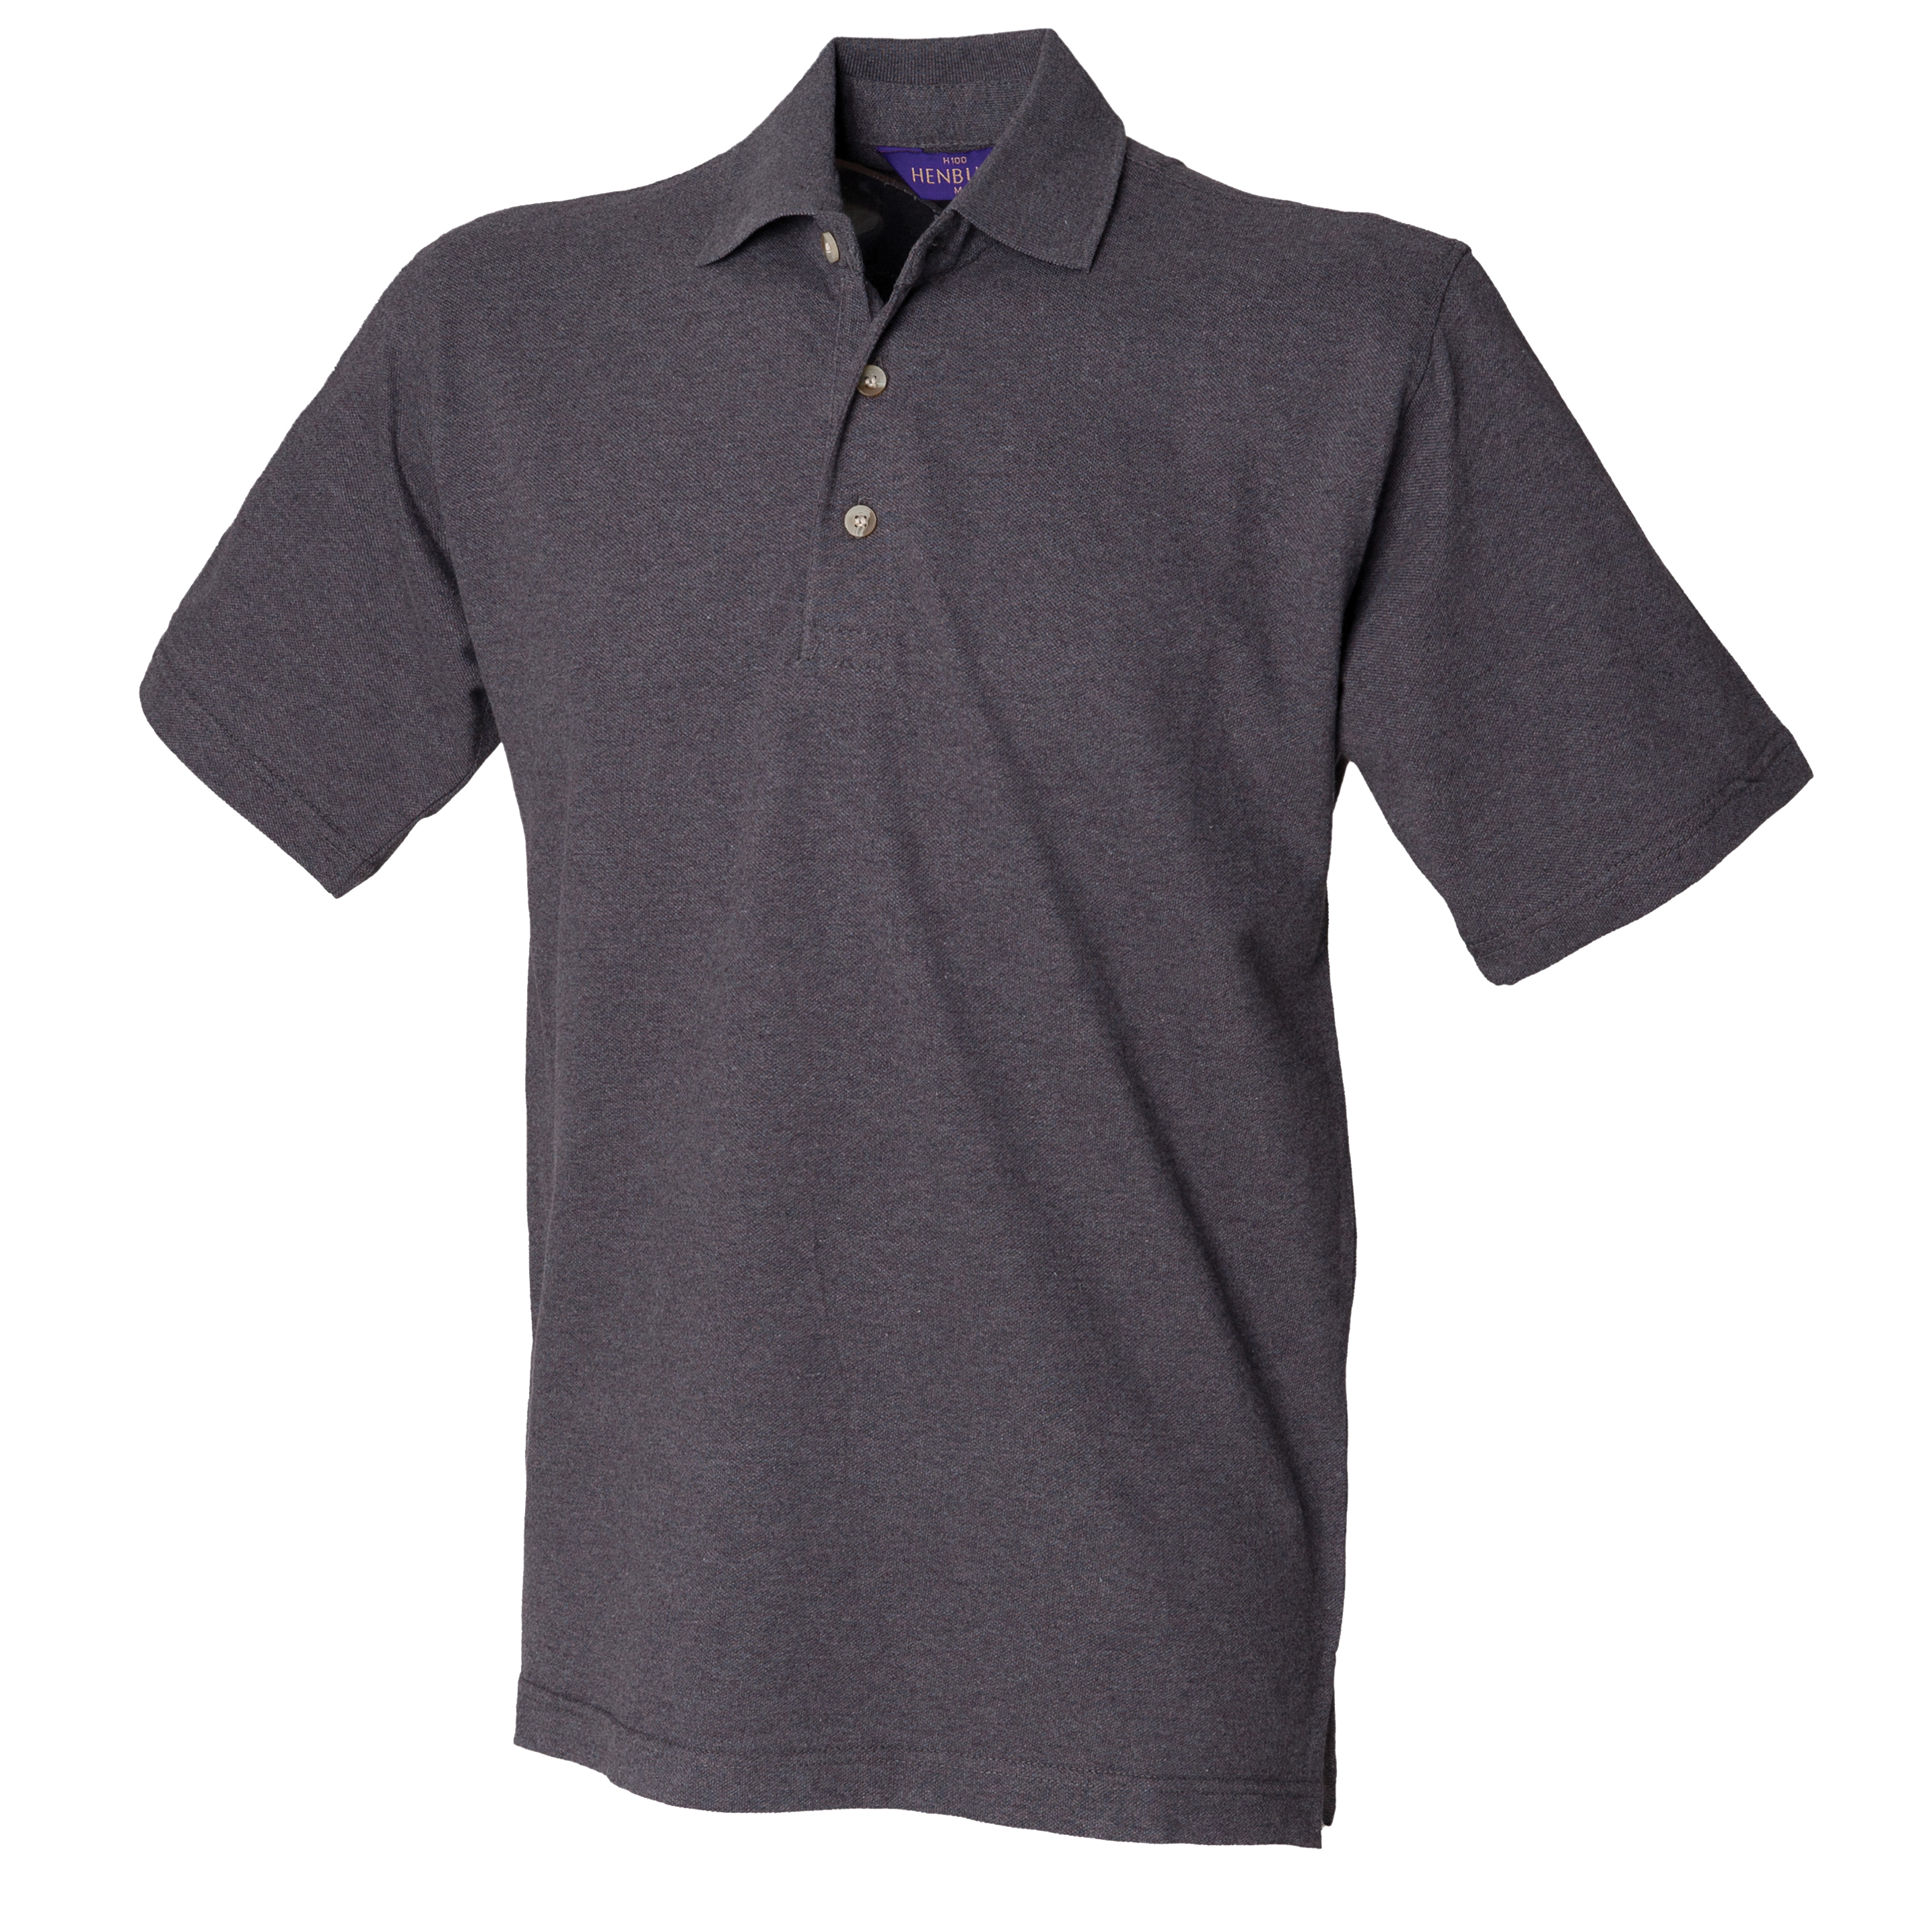 ax-httpswebsystems.s3.amazonaws.comtmp_for_downloadhenbury-classic-cotton-pique-polo-stand-up-charcoal.jpg